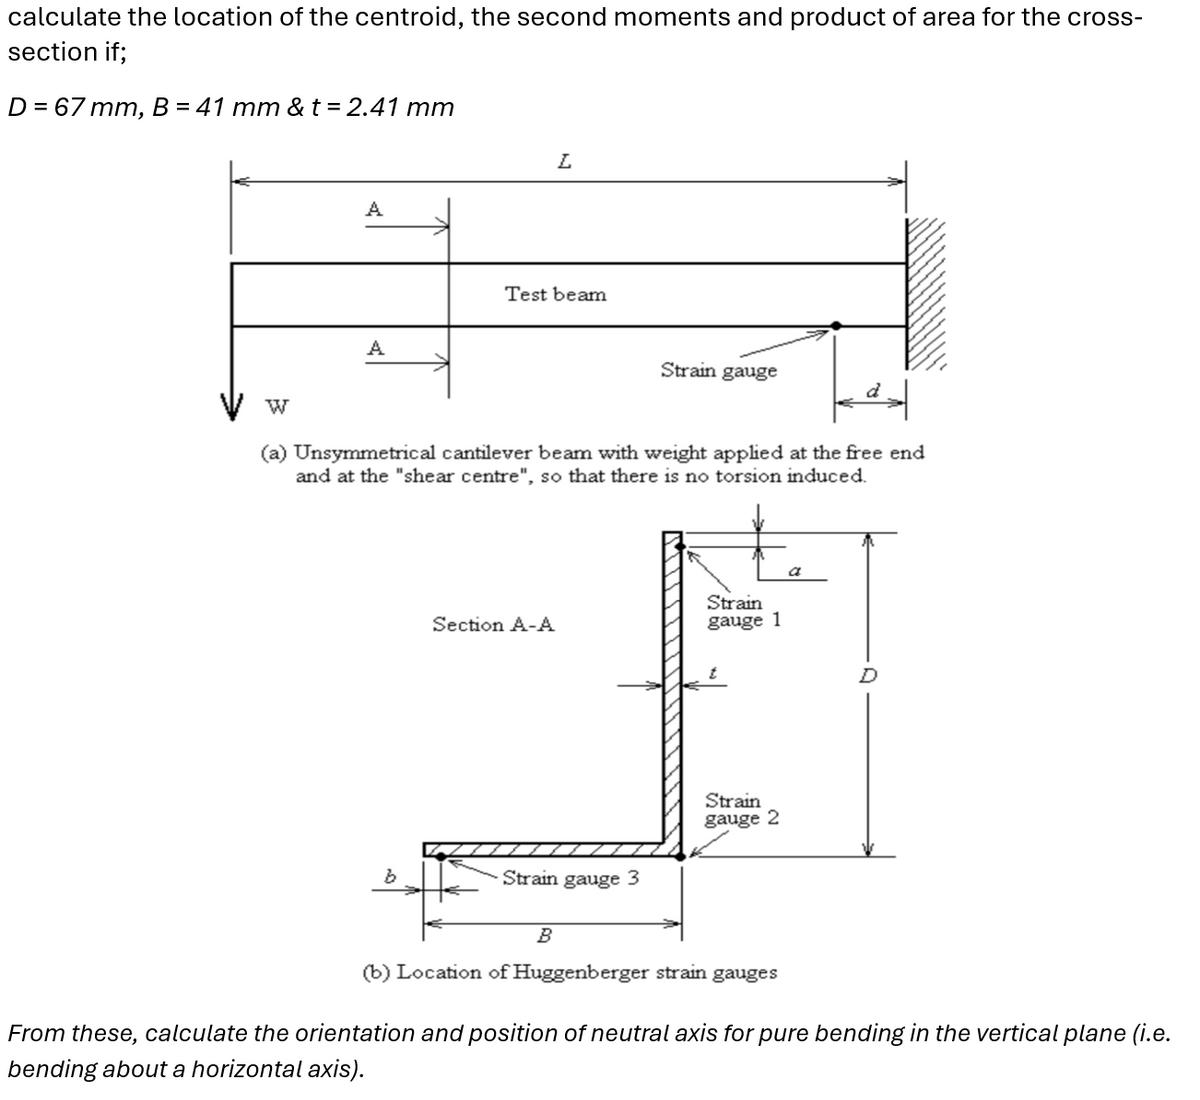 calculate the location of the centroid, the second moments and product of area for the cross-
section if;
D = 67 mm, B = 41 mm & t = 2.41 mm
A
L
Test beam
A
Strain gauge
W
(a) Unsymmetrical cantilever beam with weight applied at the free end
and at the "shear centre", so that there is no torsion induced.
Section A-A
Strain
gauge 1
Strain
gauge 2
b
Strain gauge 3
a
B
(b) Location of Huggenberger strain gauges
From these, calculate the orientation and position of neutral axis for pure bending in the vertical plane (i.e.
bending about a horizontal axis).